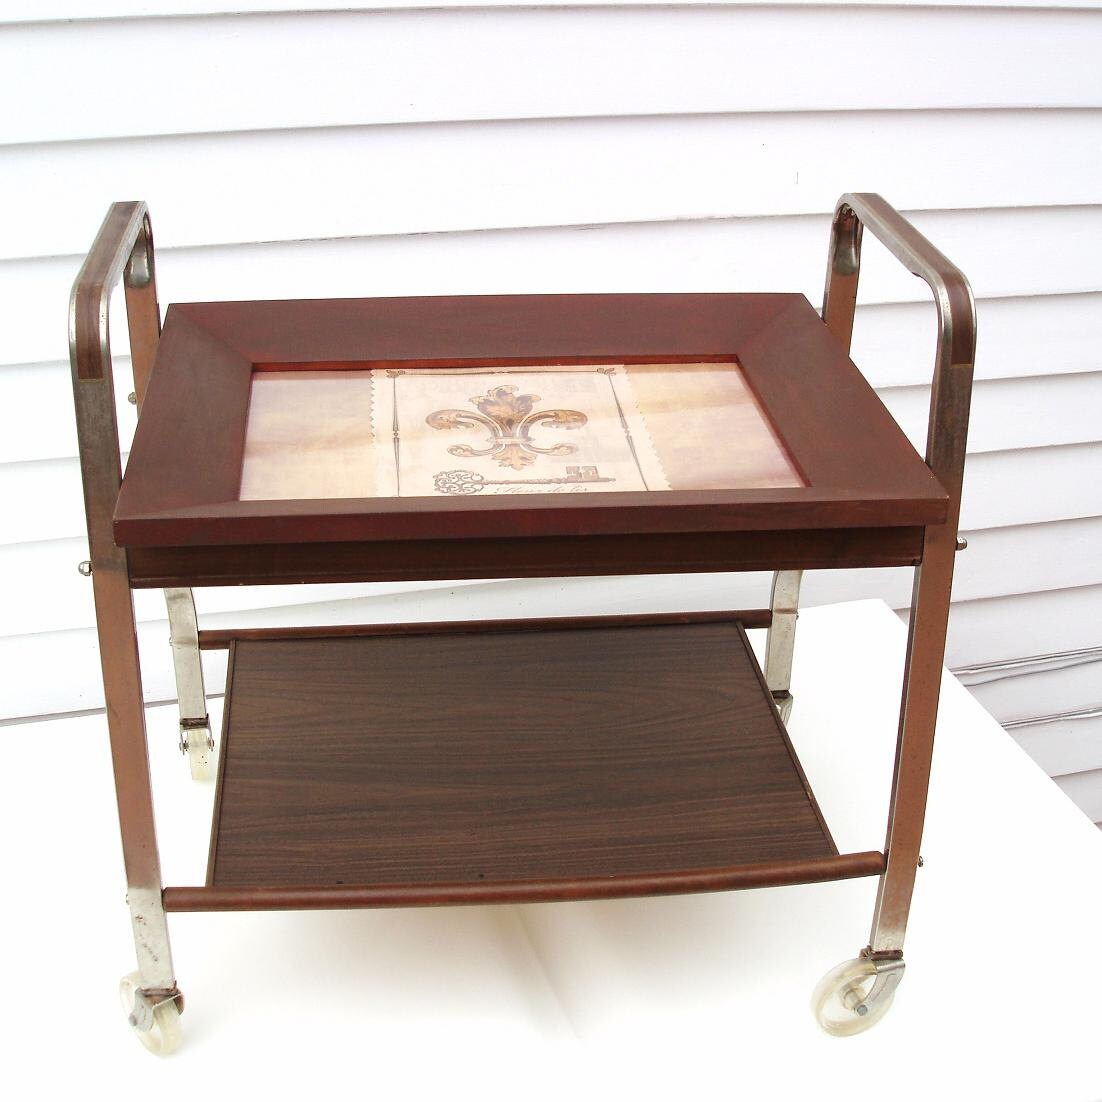 Vintage Metal TV Stand Rolling Cart Rustic Serving by WhimzyThyme